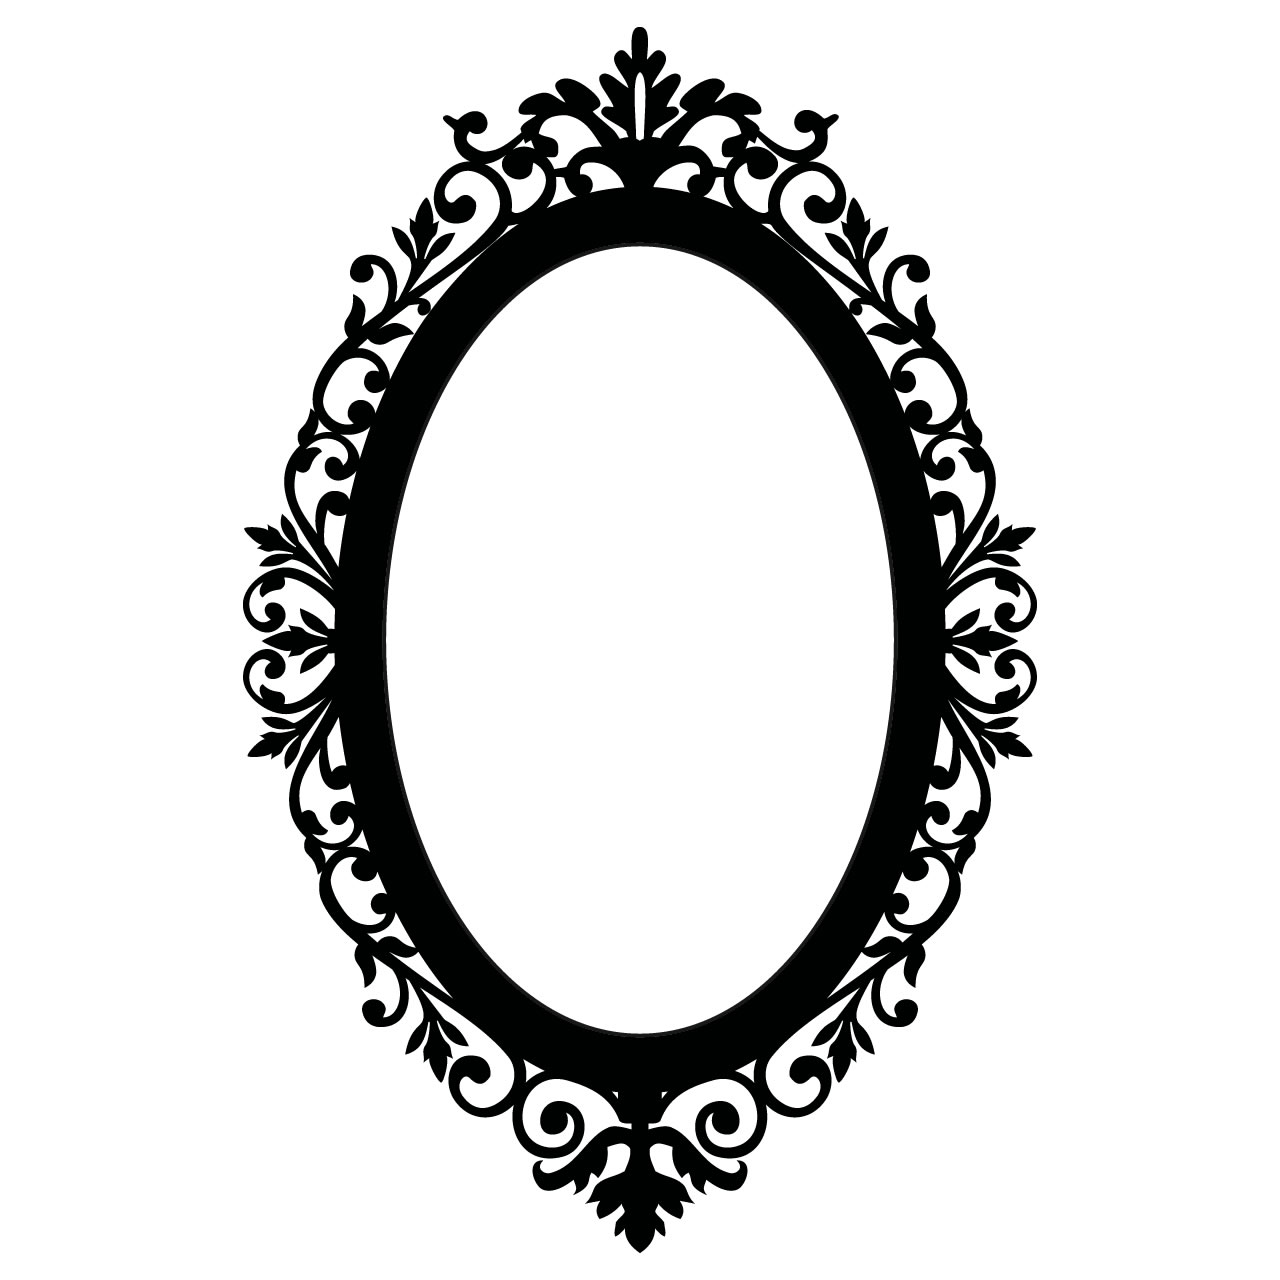 Victorian Oval Frame Clipart   Clipart Panda   Free Clipart Images